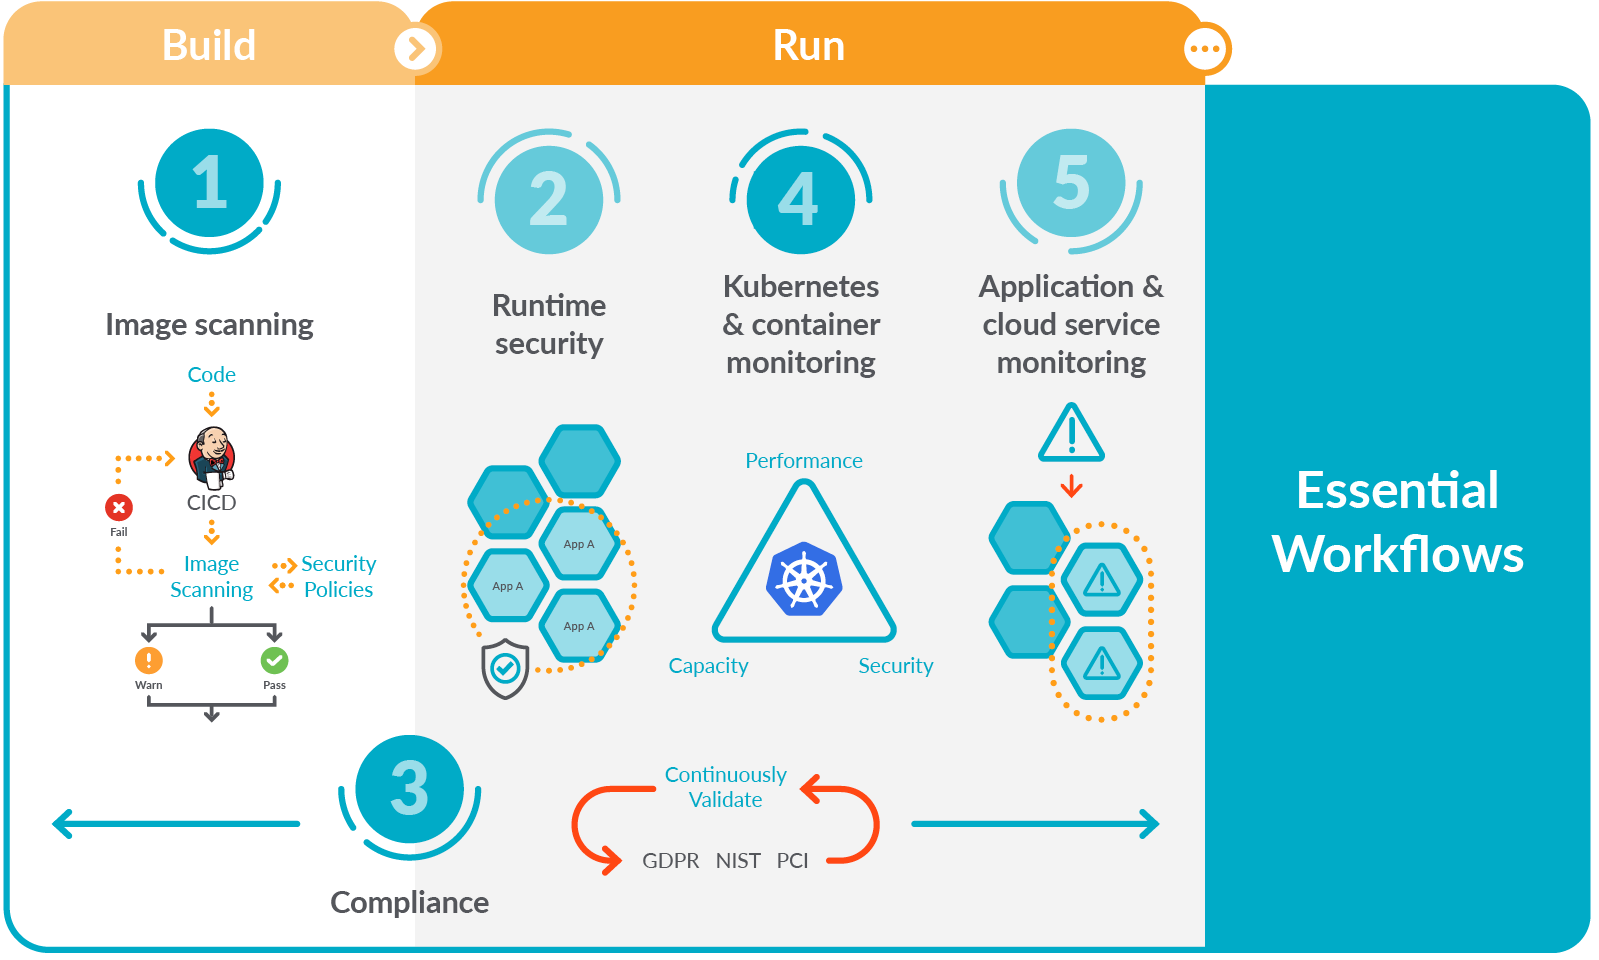 The five essential workflows for DevOps are: On the build stage, image scanning. On the run stage, runtime security, kubernetes and container monitoring, application and cloud service monitoring; and through all your application lifecycle, compliance.